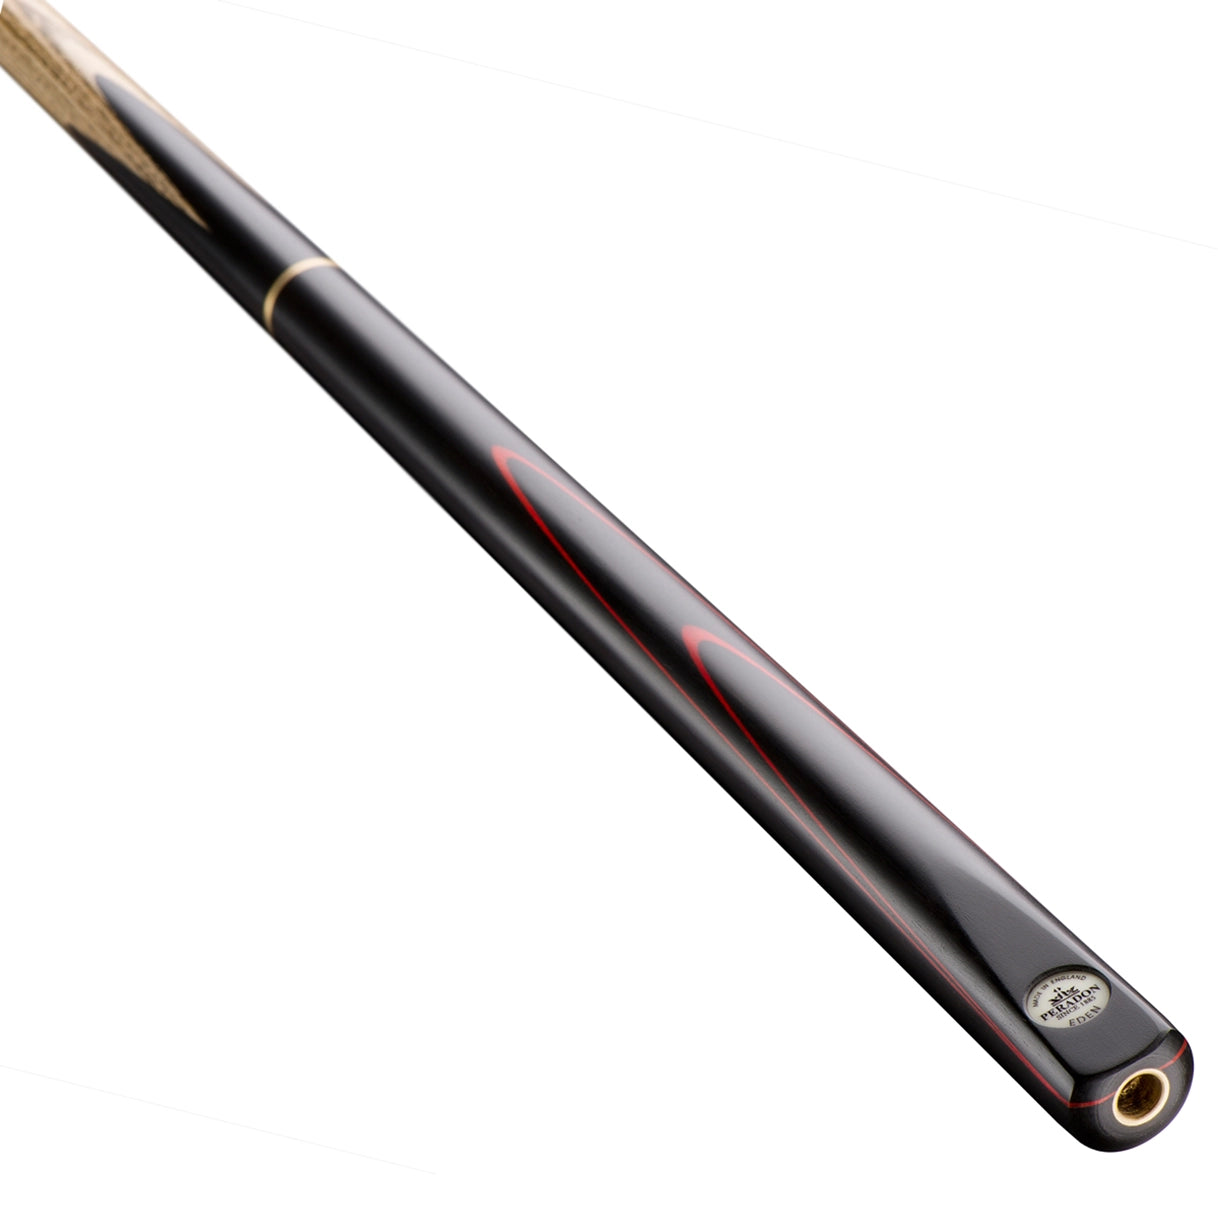 Peradon Eden 3/4 jointed Snooker cue. On angle view